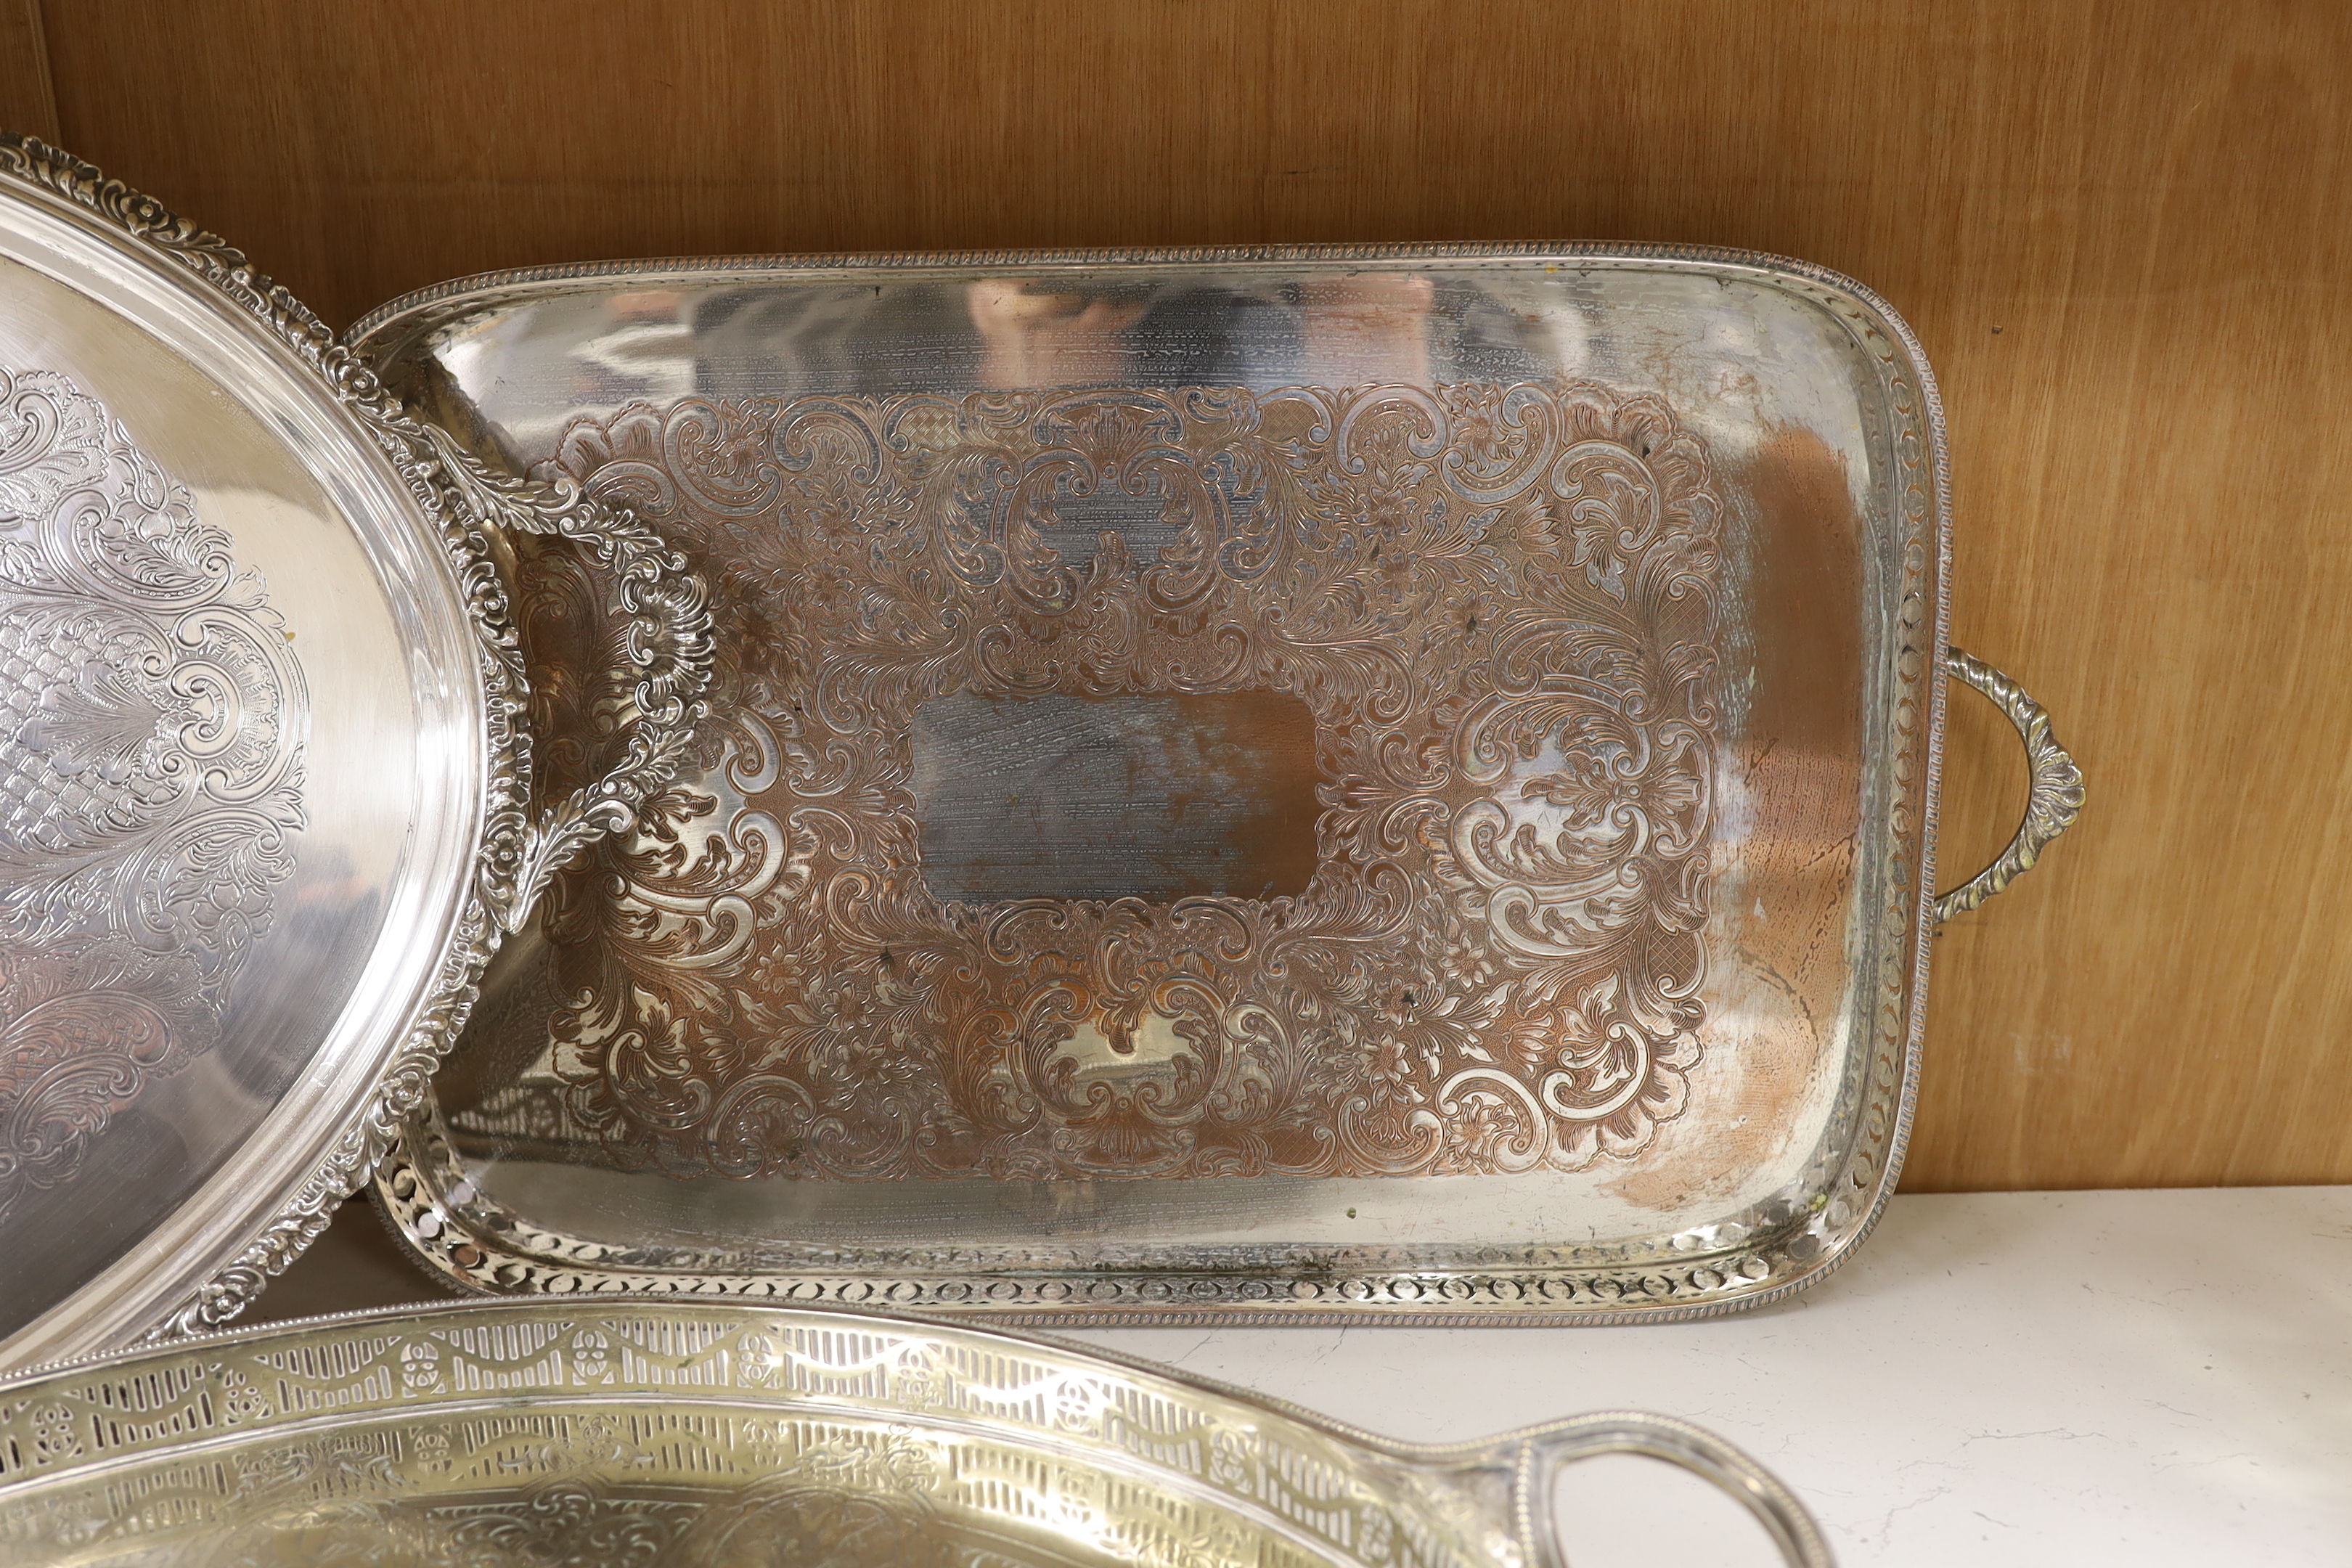 Four items of plated wares; a Victorian galleried tray, a soup tureen and two other trays, largest tray 67cm